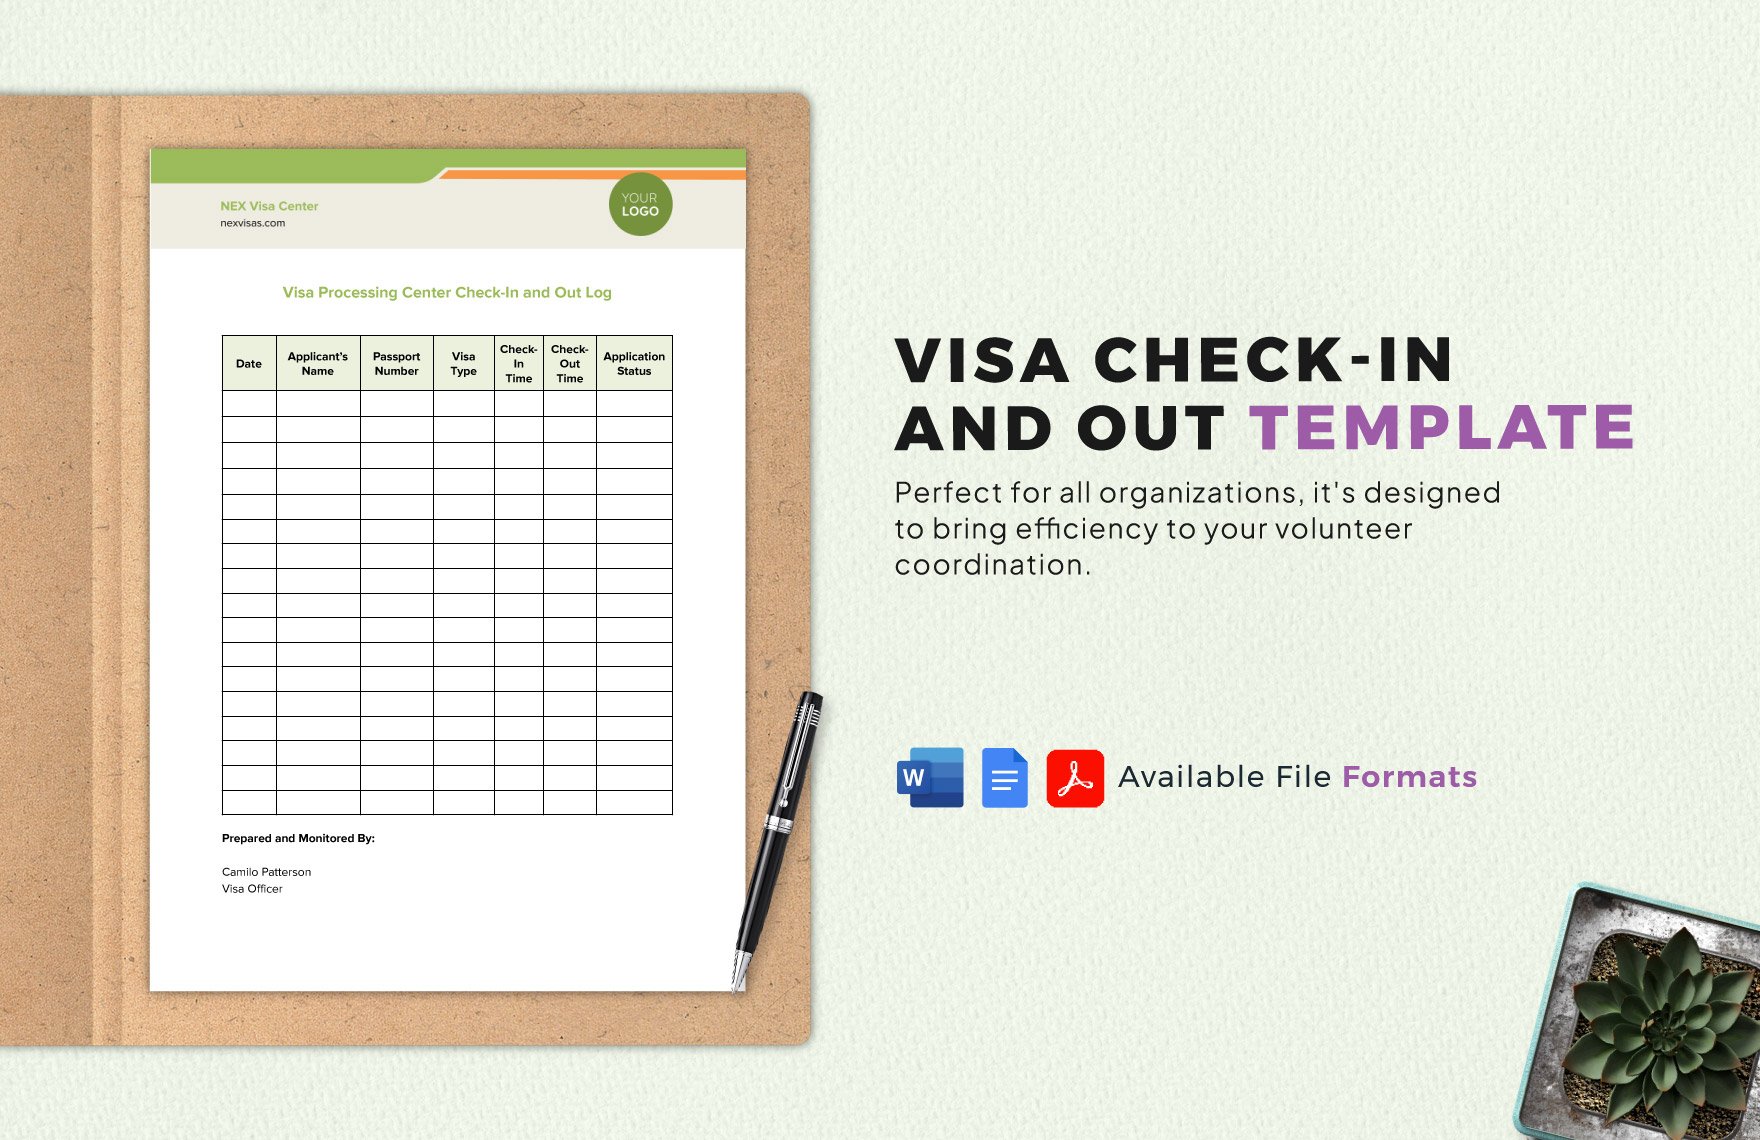 Visa Check-in and Out Template